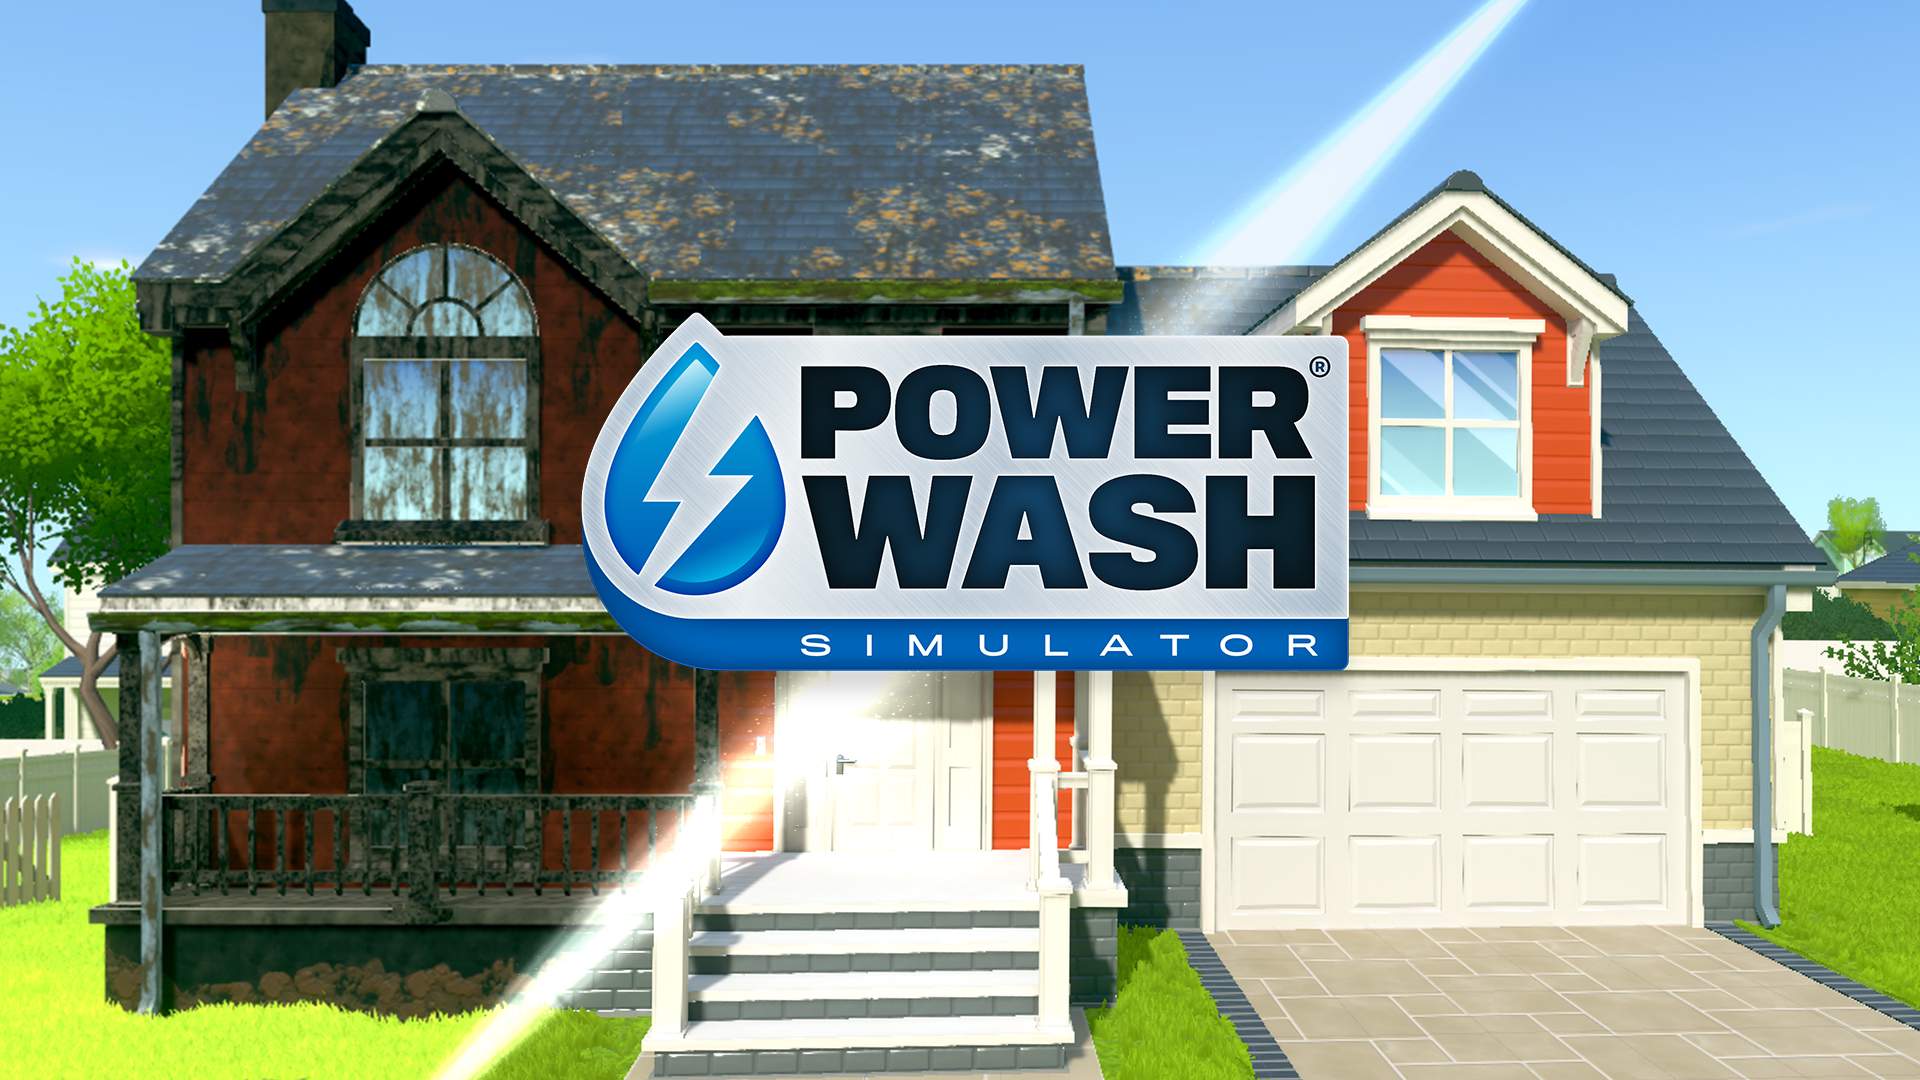 RELEASE THE PRESSURE WITH POWERWASH SIMULATOR'S BOXED RELEASE, COMING SOON  TO A SHELF NEAR YOU - Square Enix North America Press Hub